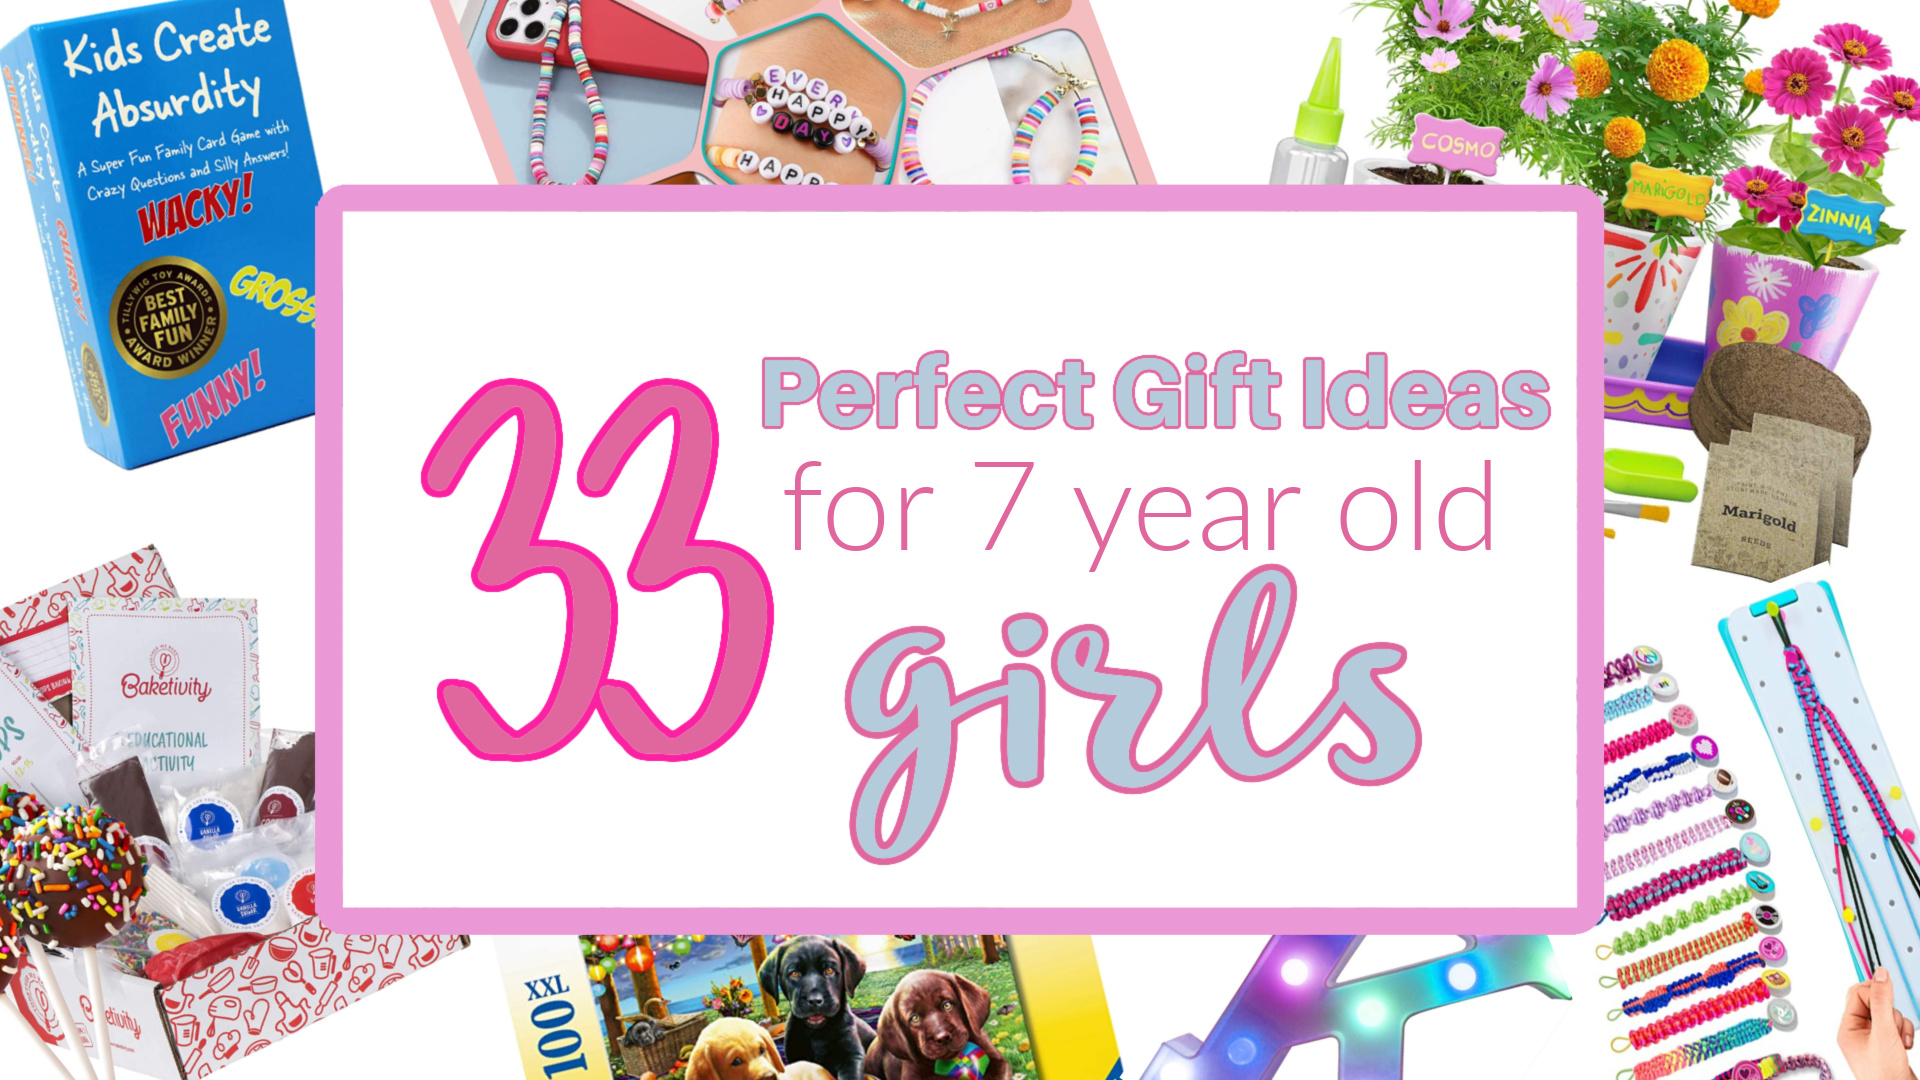 image at top of post that says 33 perfect gift ideas for 7 year old girls